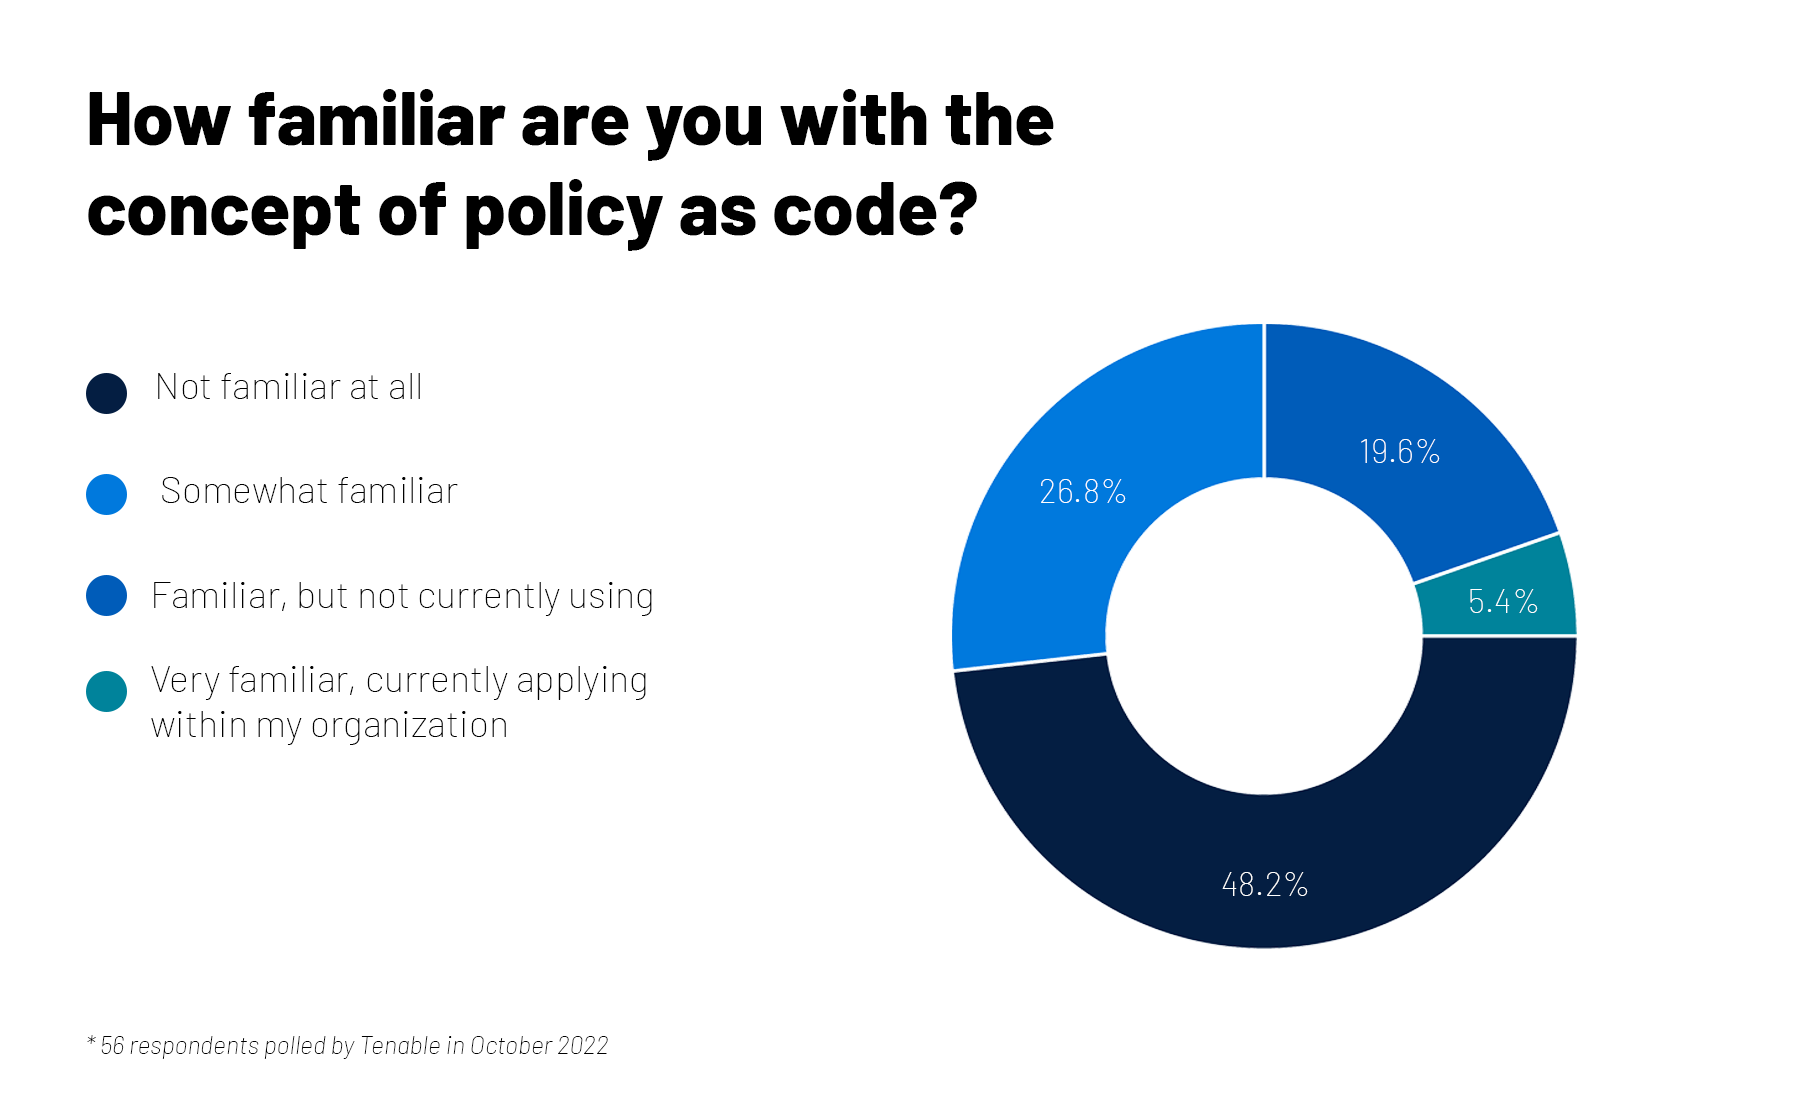 A quick check on policy as code usage